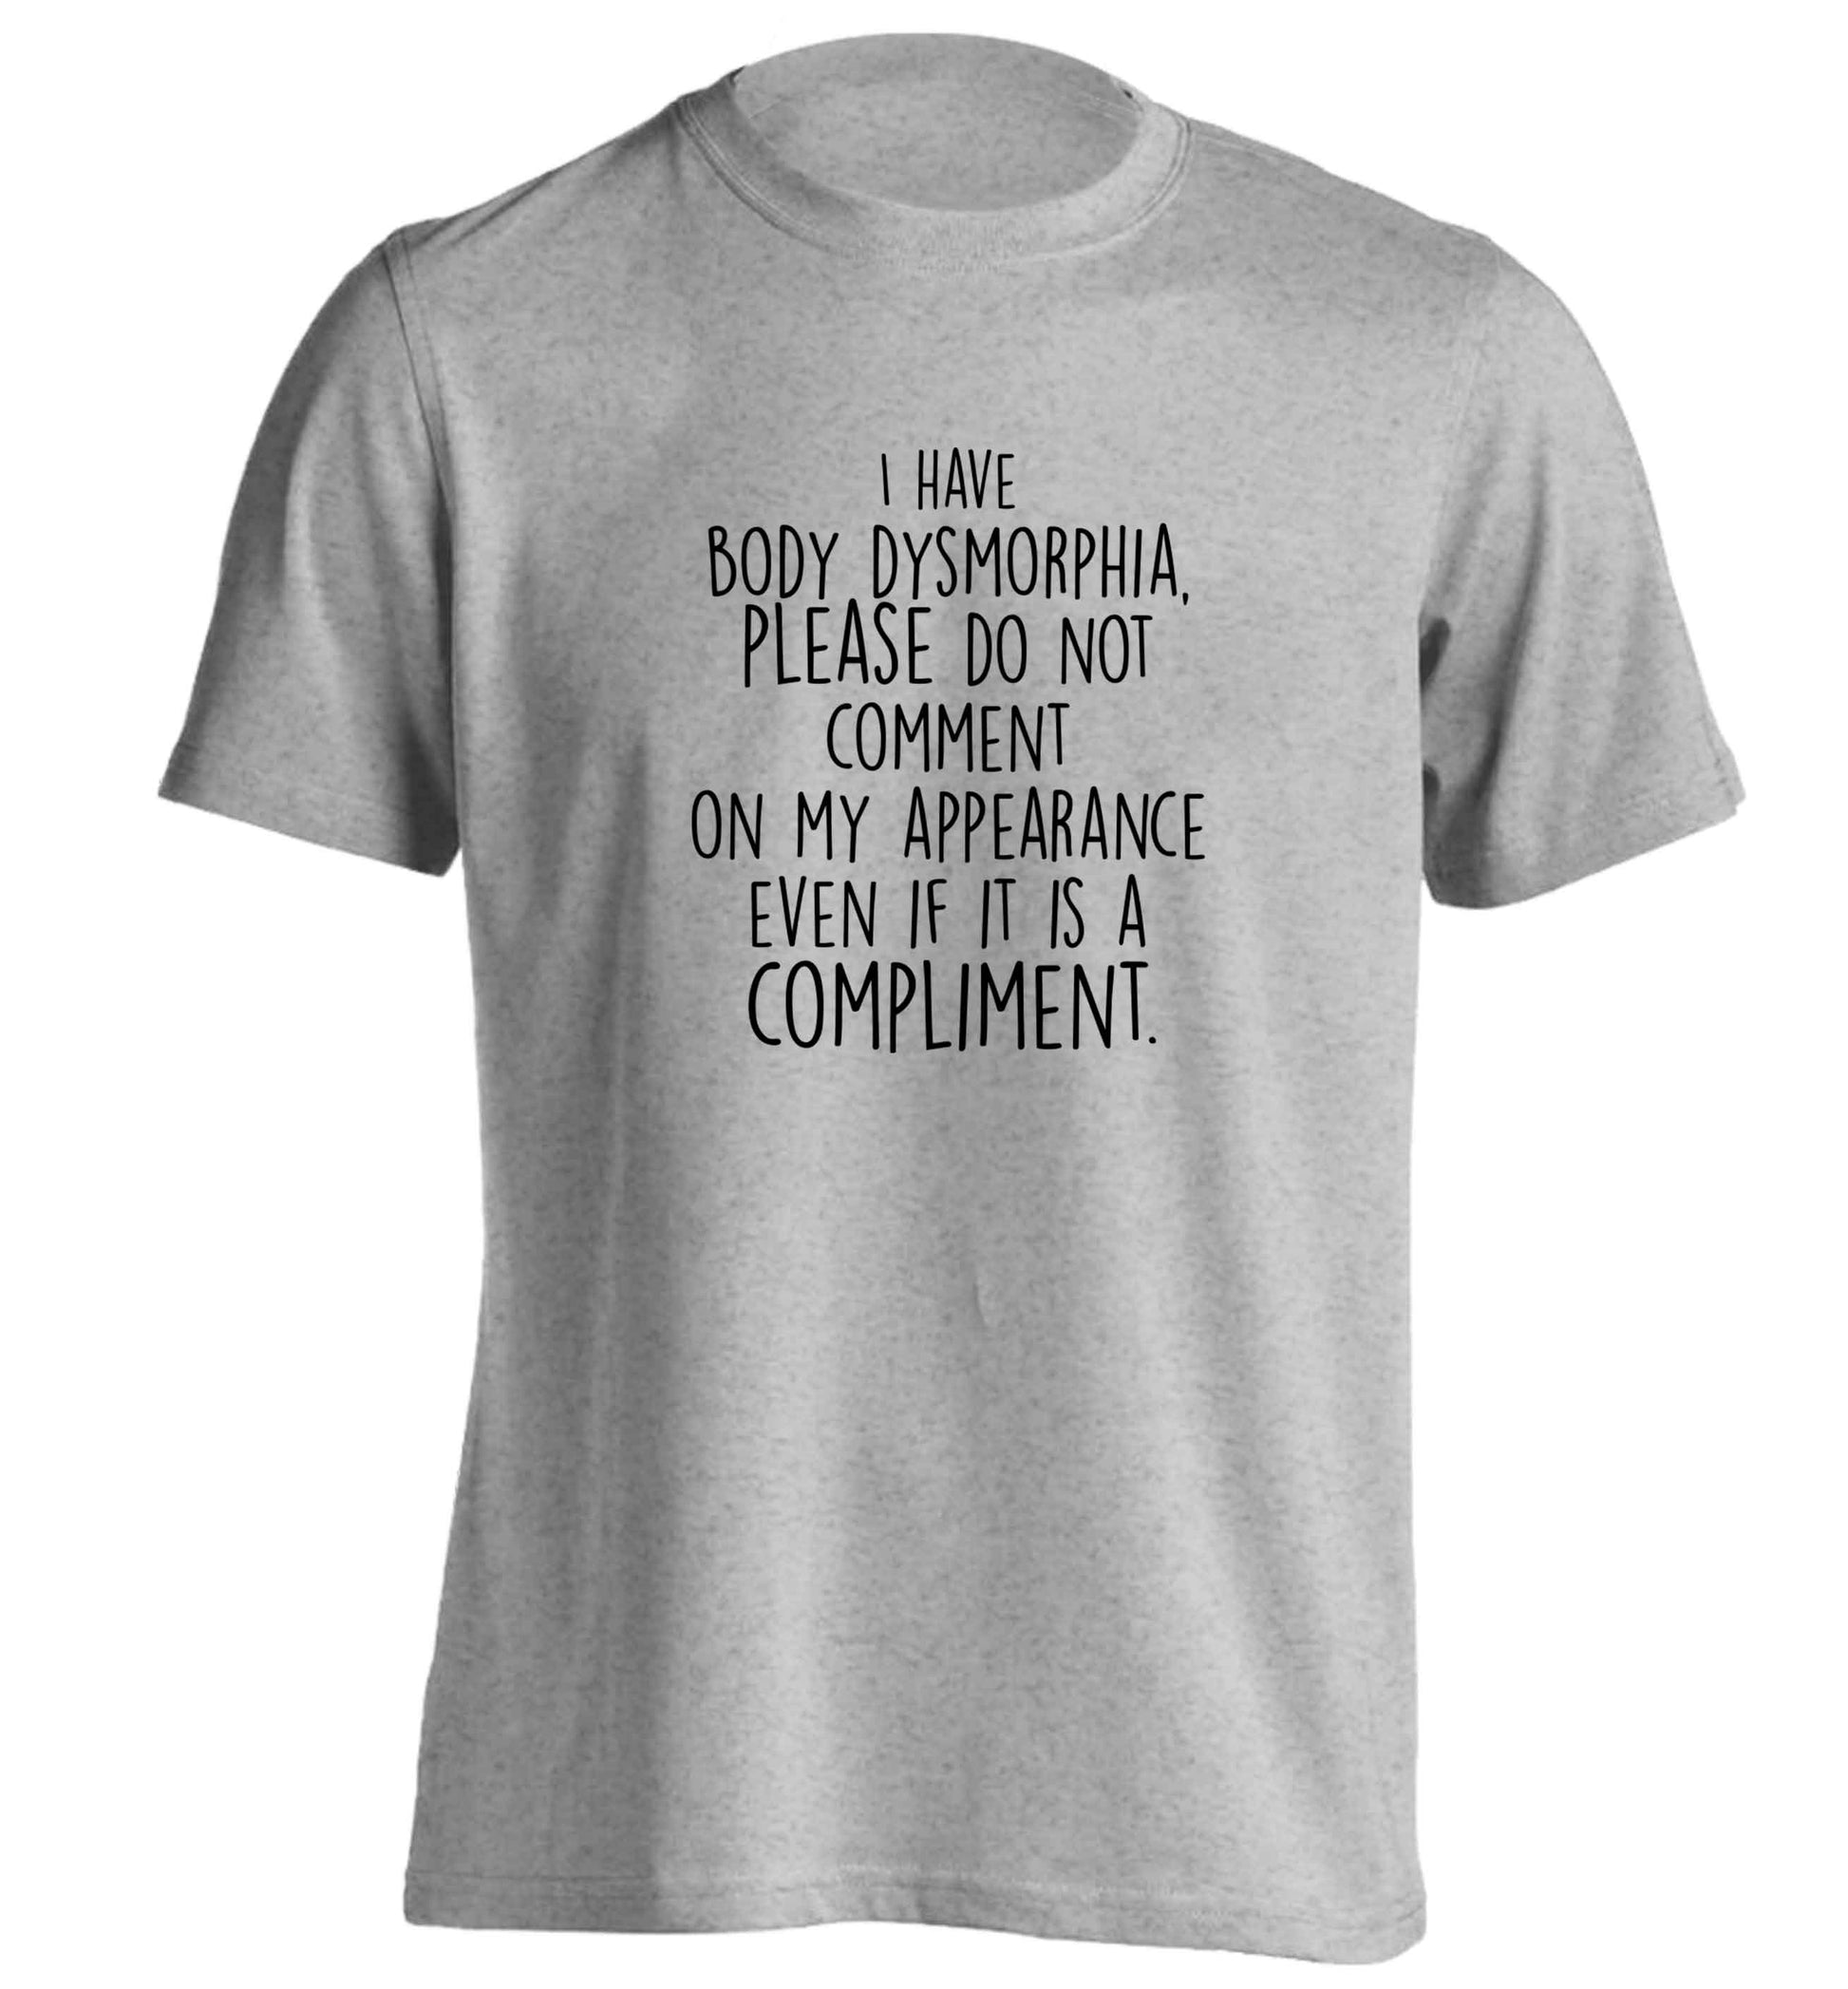 I have body dysmorphia, please do not comment on my appearance even if it is a compliment adults unisex grey Tshirt 2XL